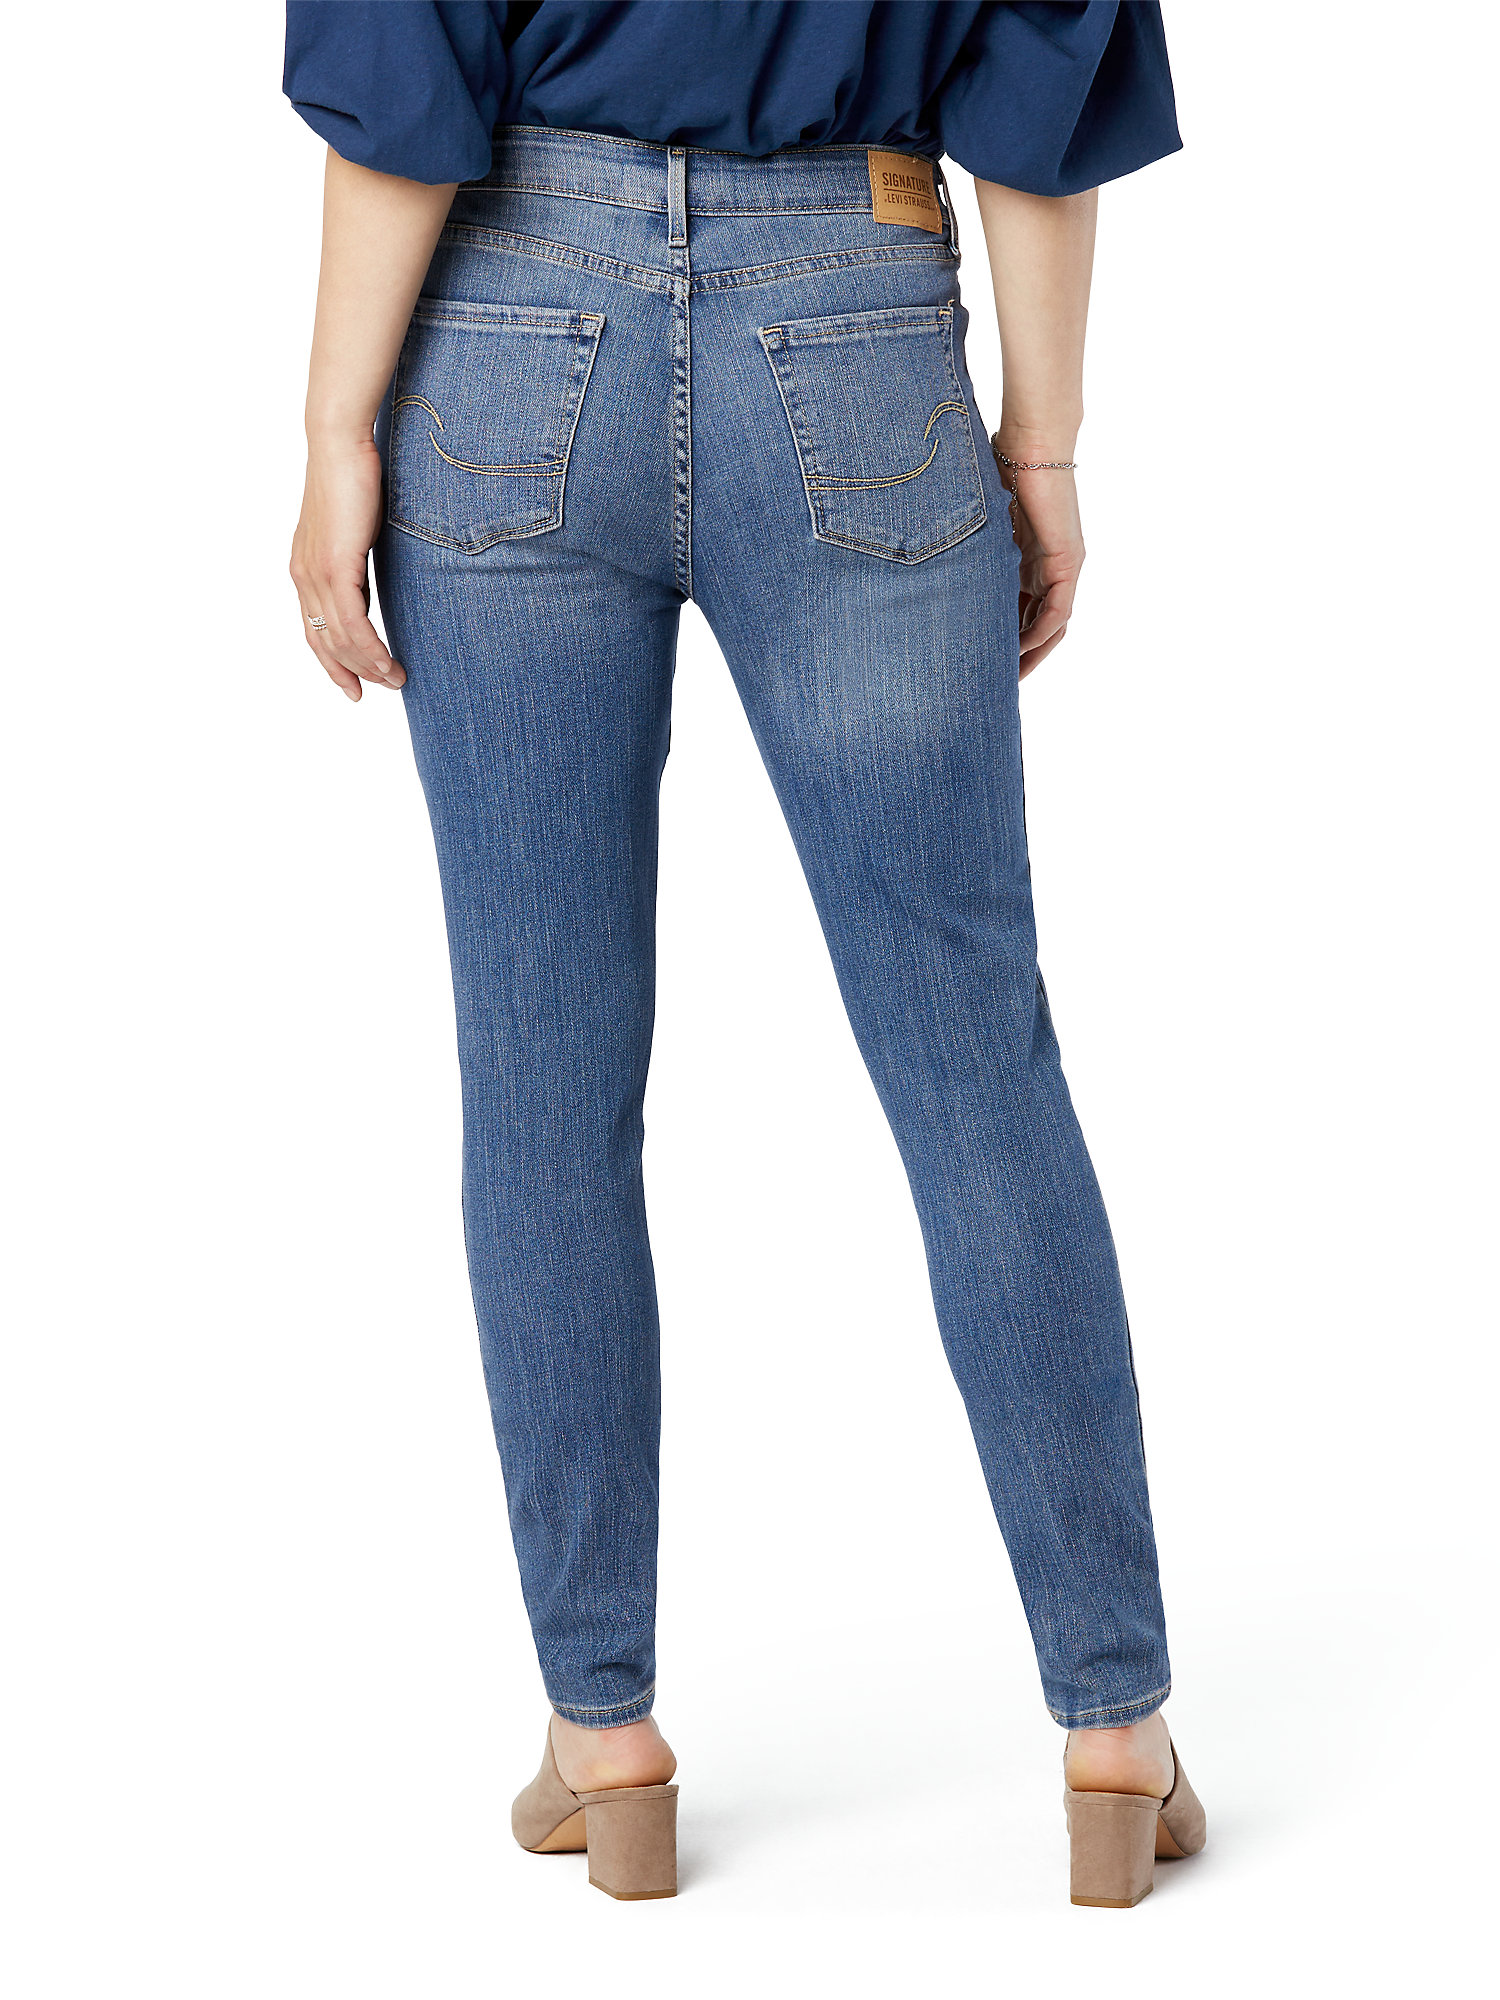 Signature by Levi Strauss & Co. Women's and Women's Plus Mid Rise Skinny Jeans - image 3 of 5